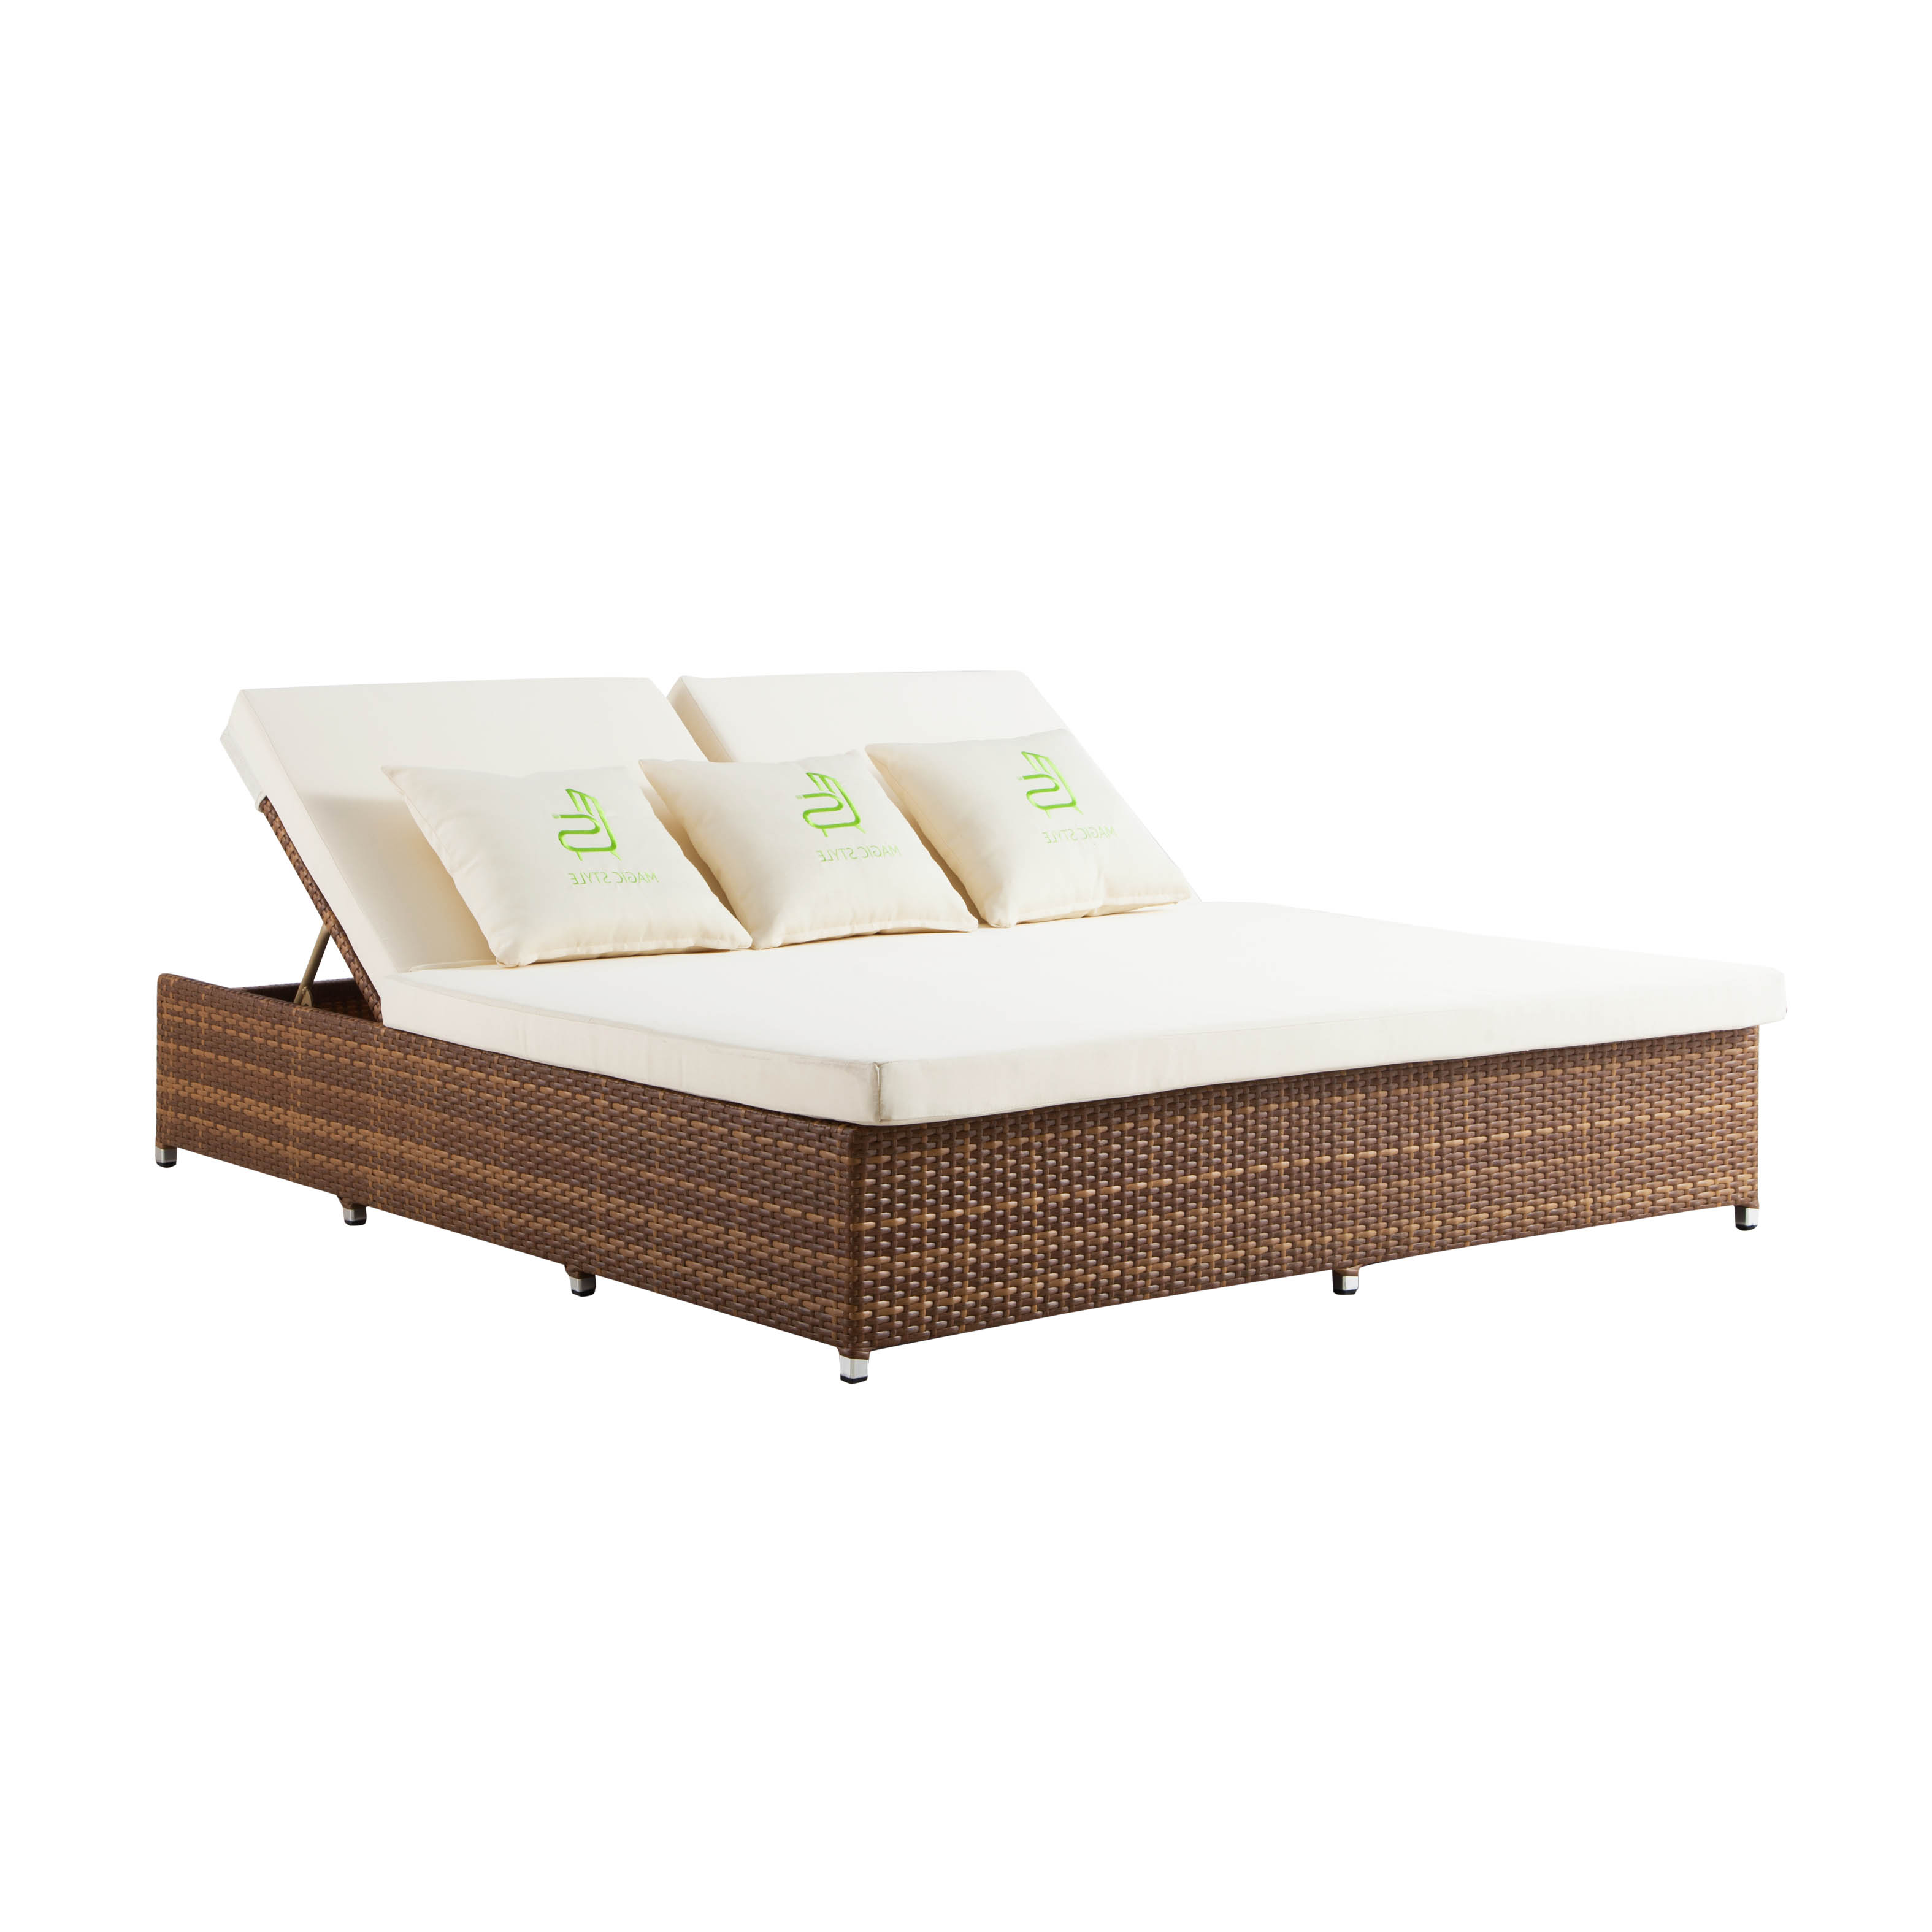 Angela rattan daybed S3